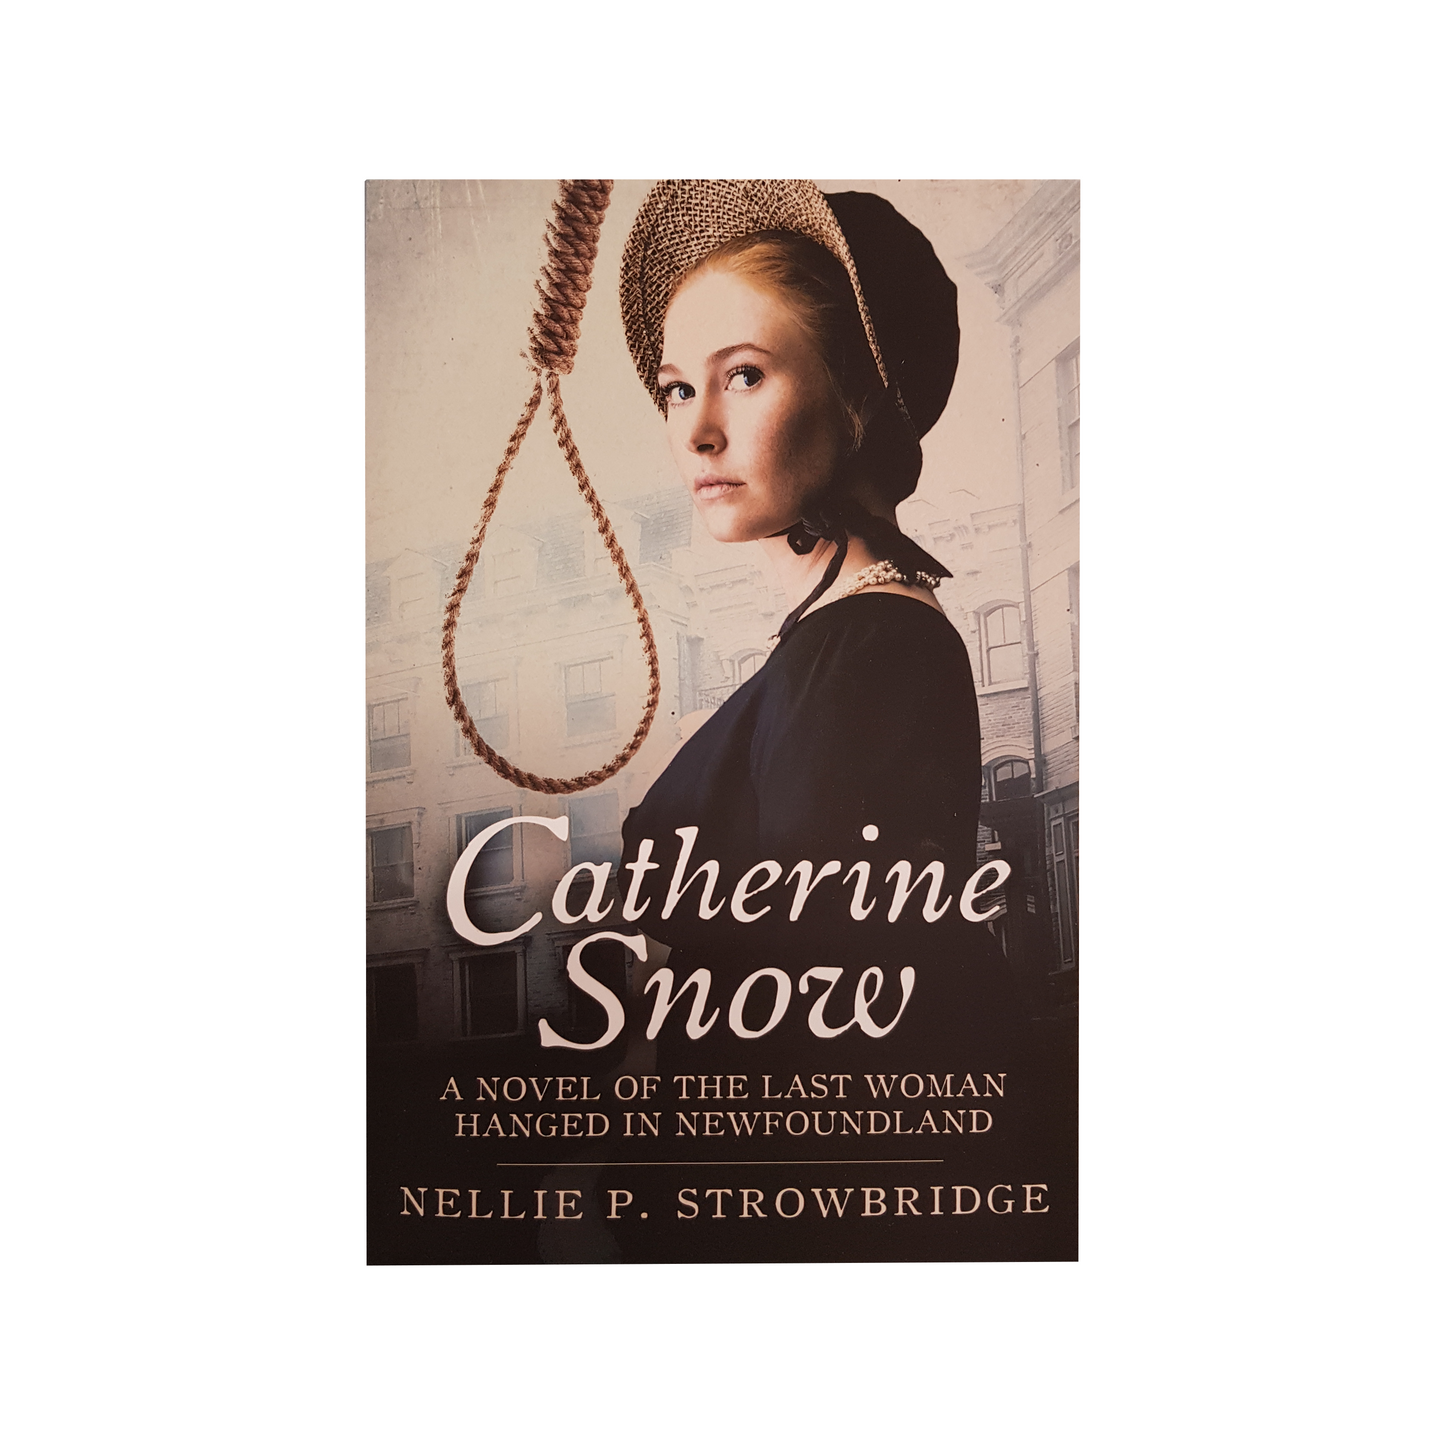 Catherine Snow A Novel Of The Last Woman Hanged In Newfoundland